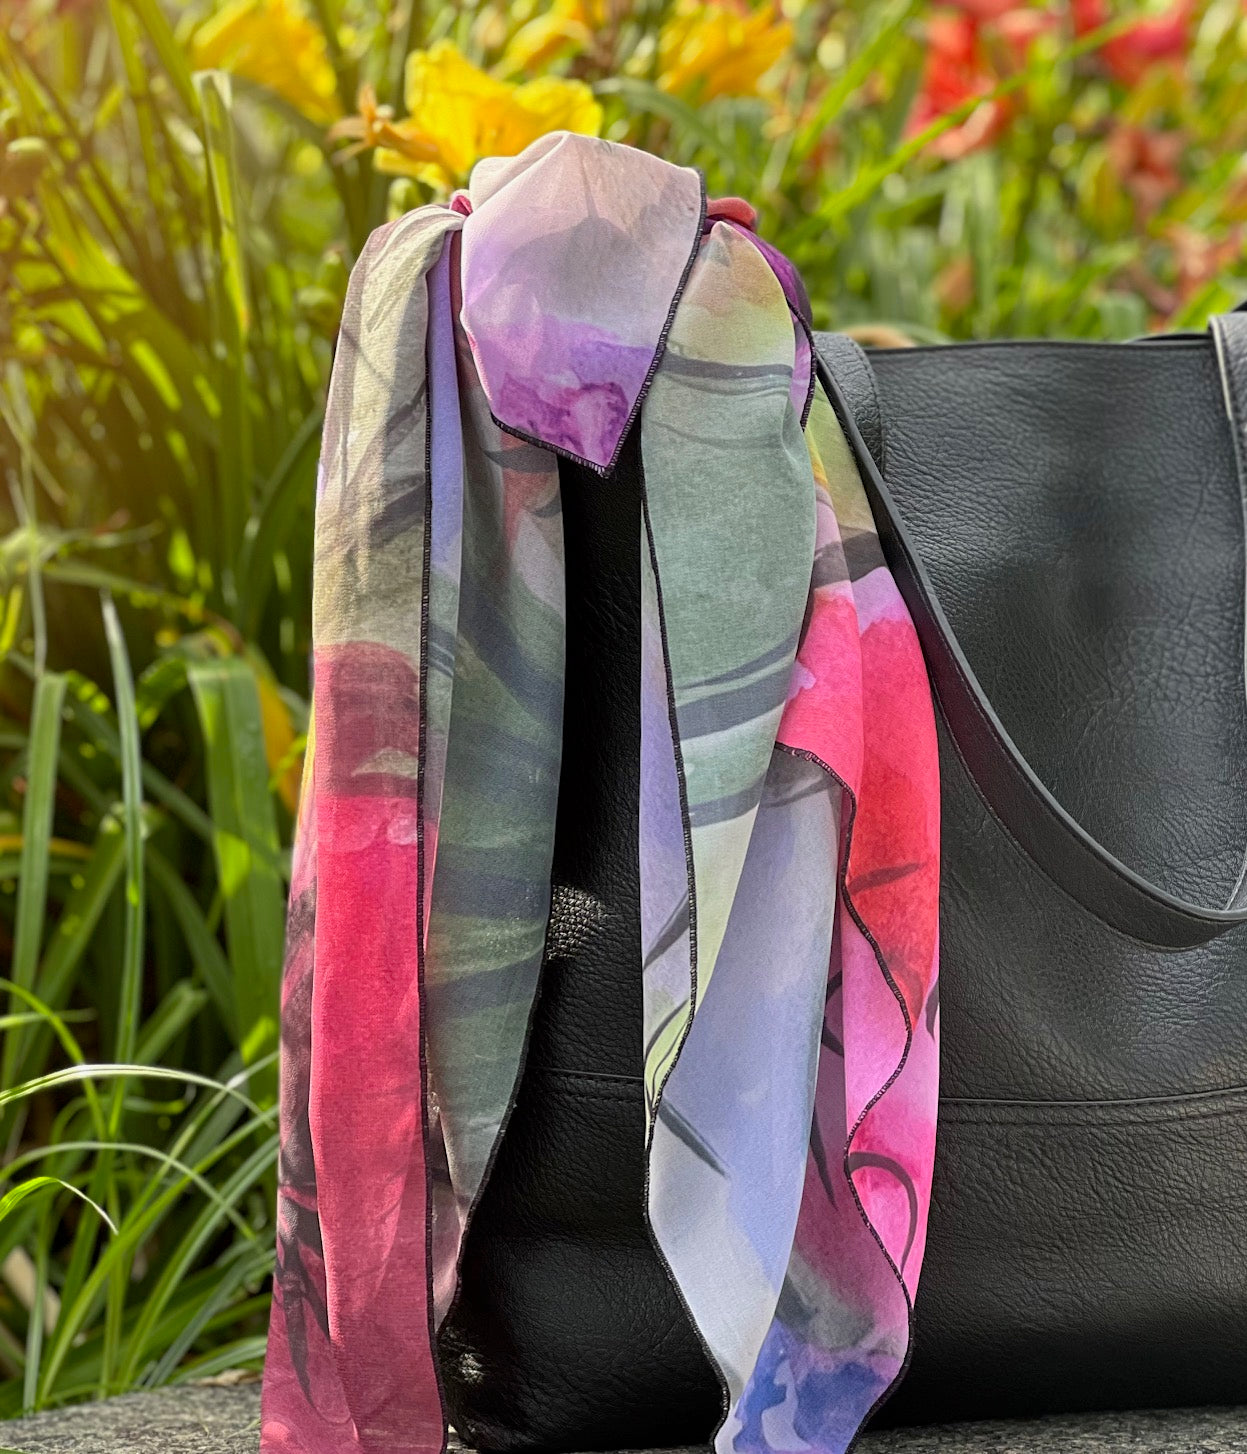 Etendre is a beautiful vibrant scarf for that perfect pop of color!